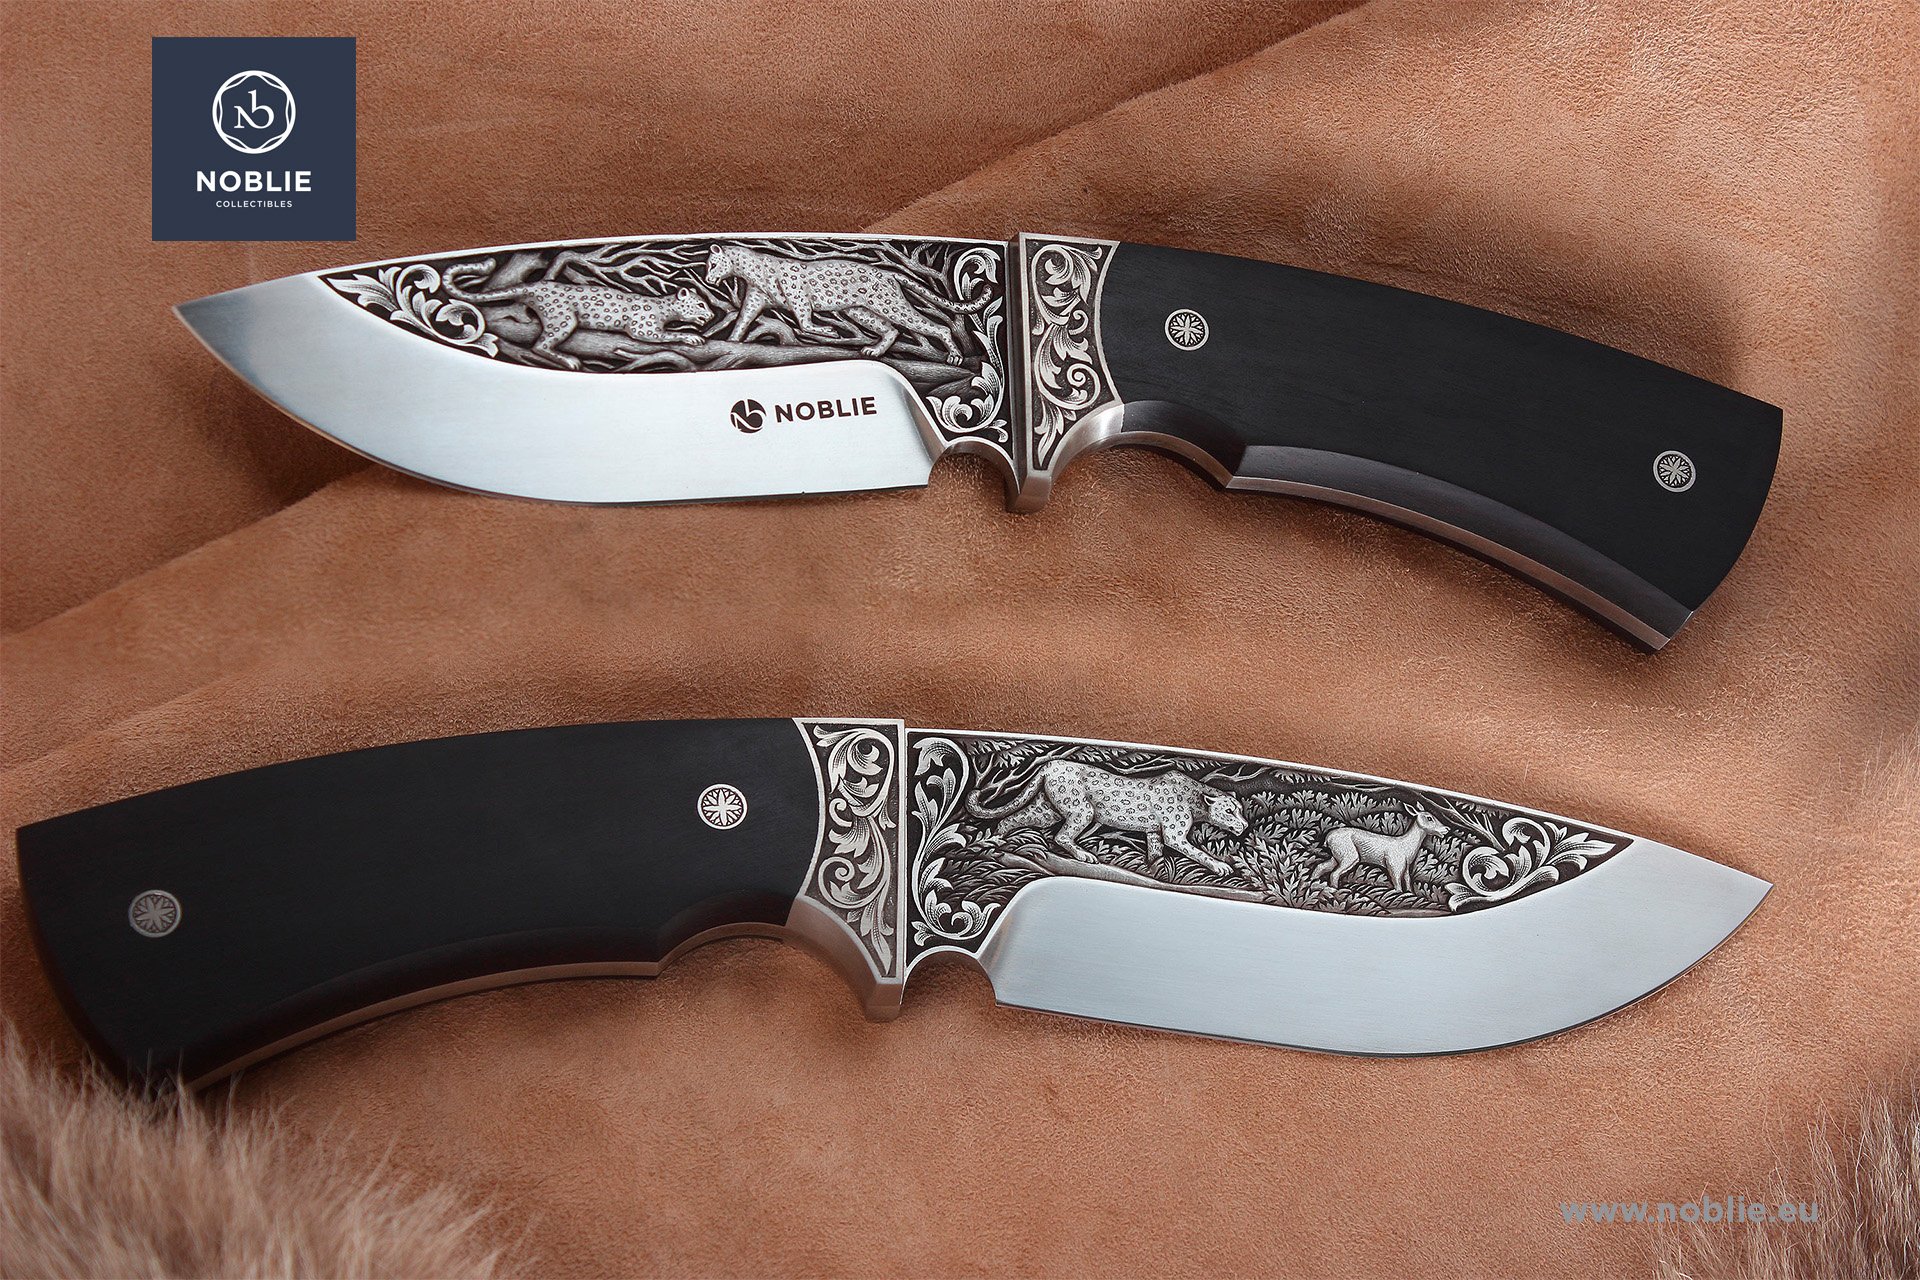 New engraved custom knives by NOBLIE